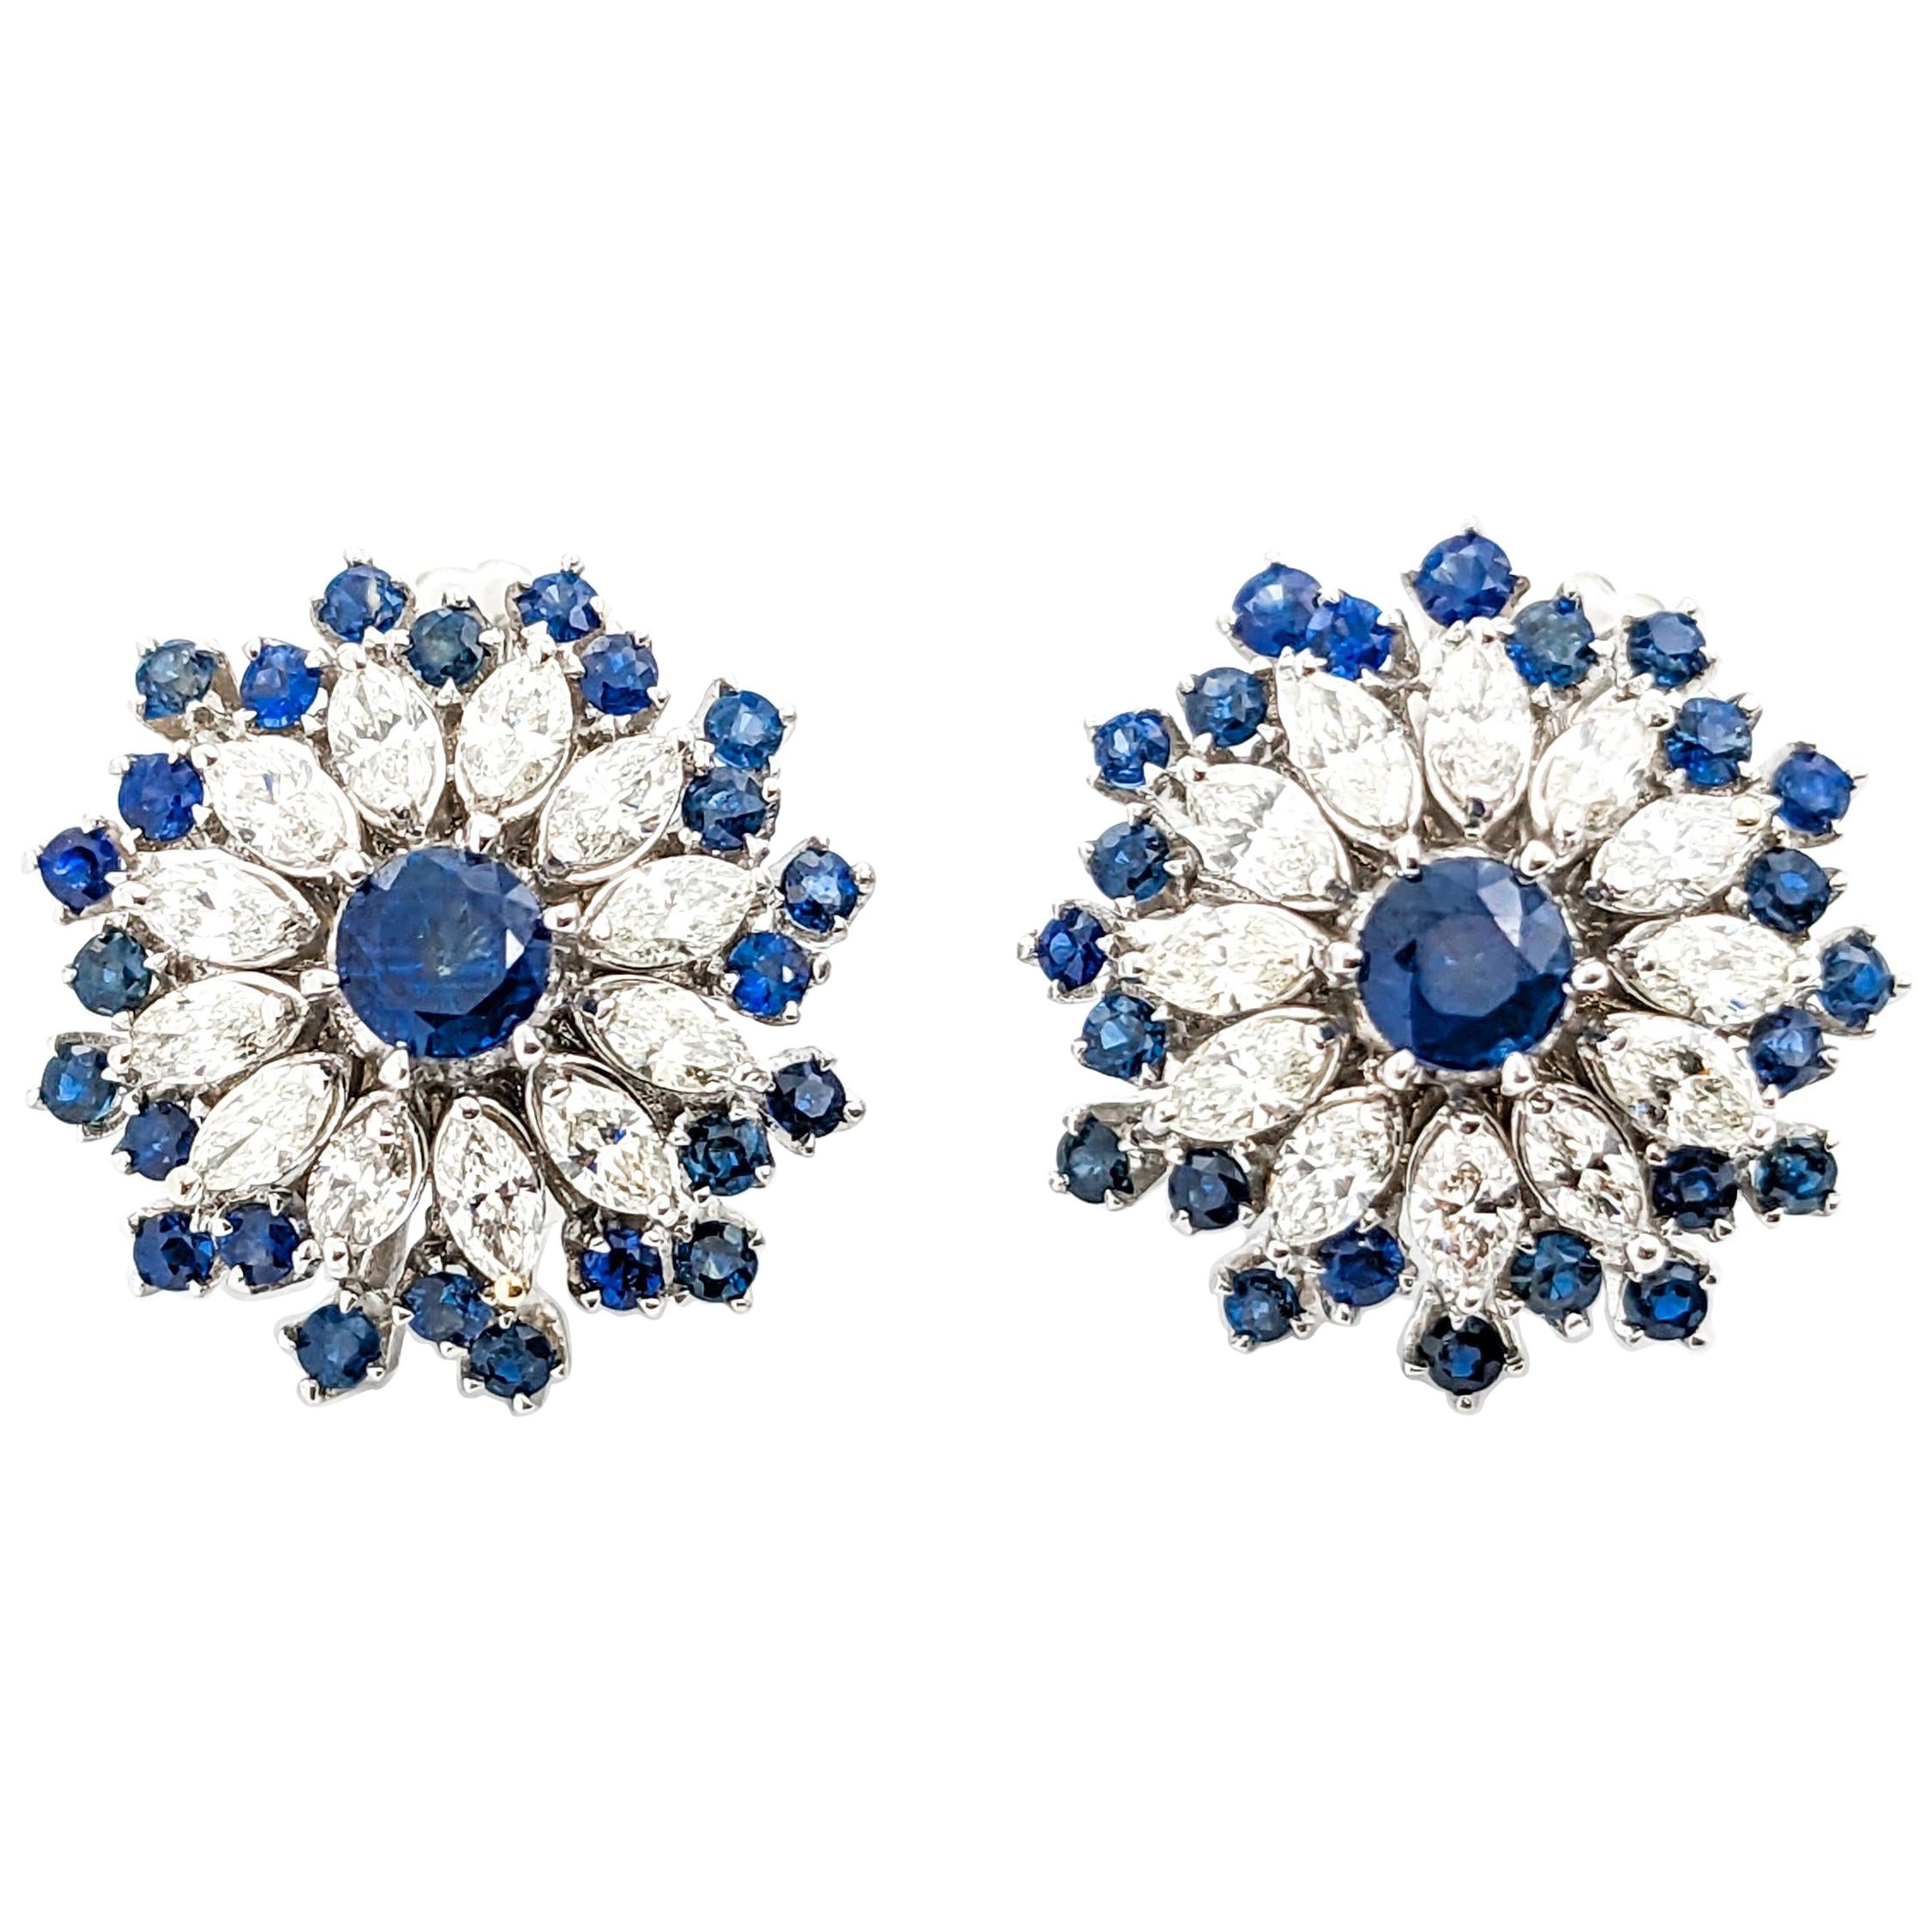 Vintage Cocktail 4.50ctw Bule Sapphire & Diamond Earrings In White Gold